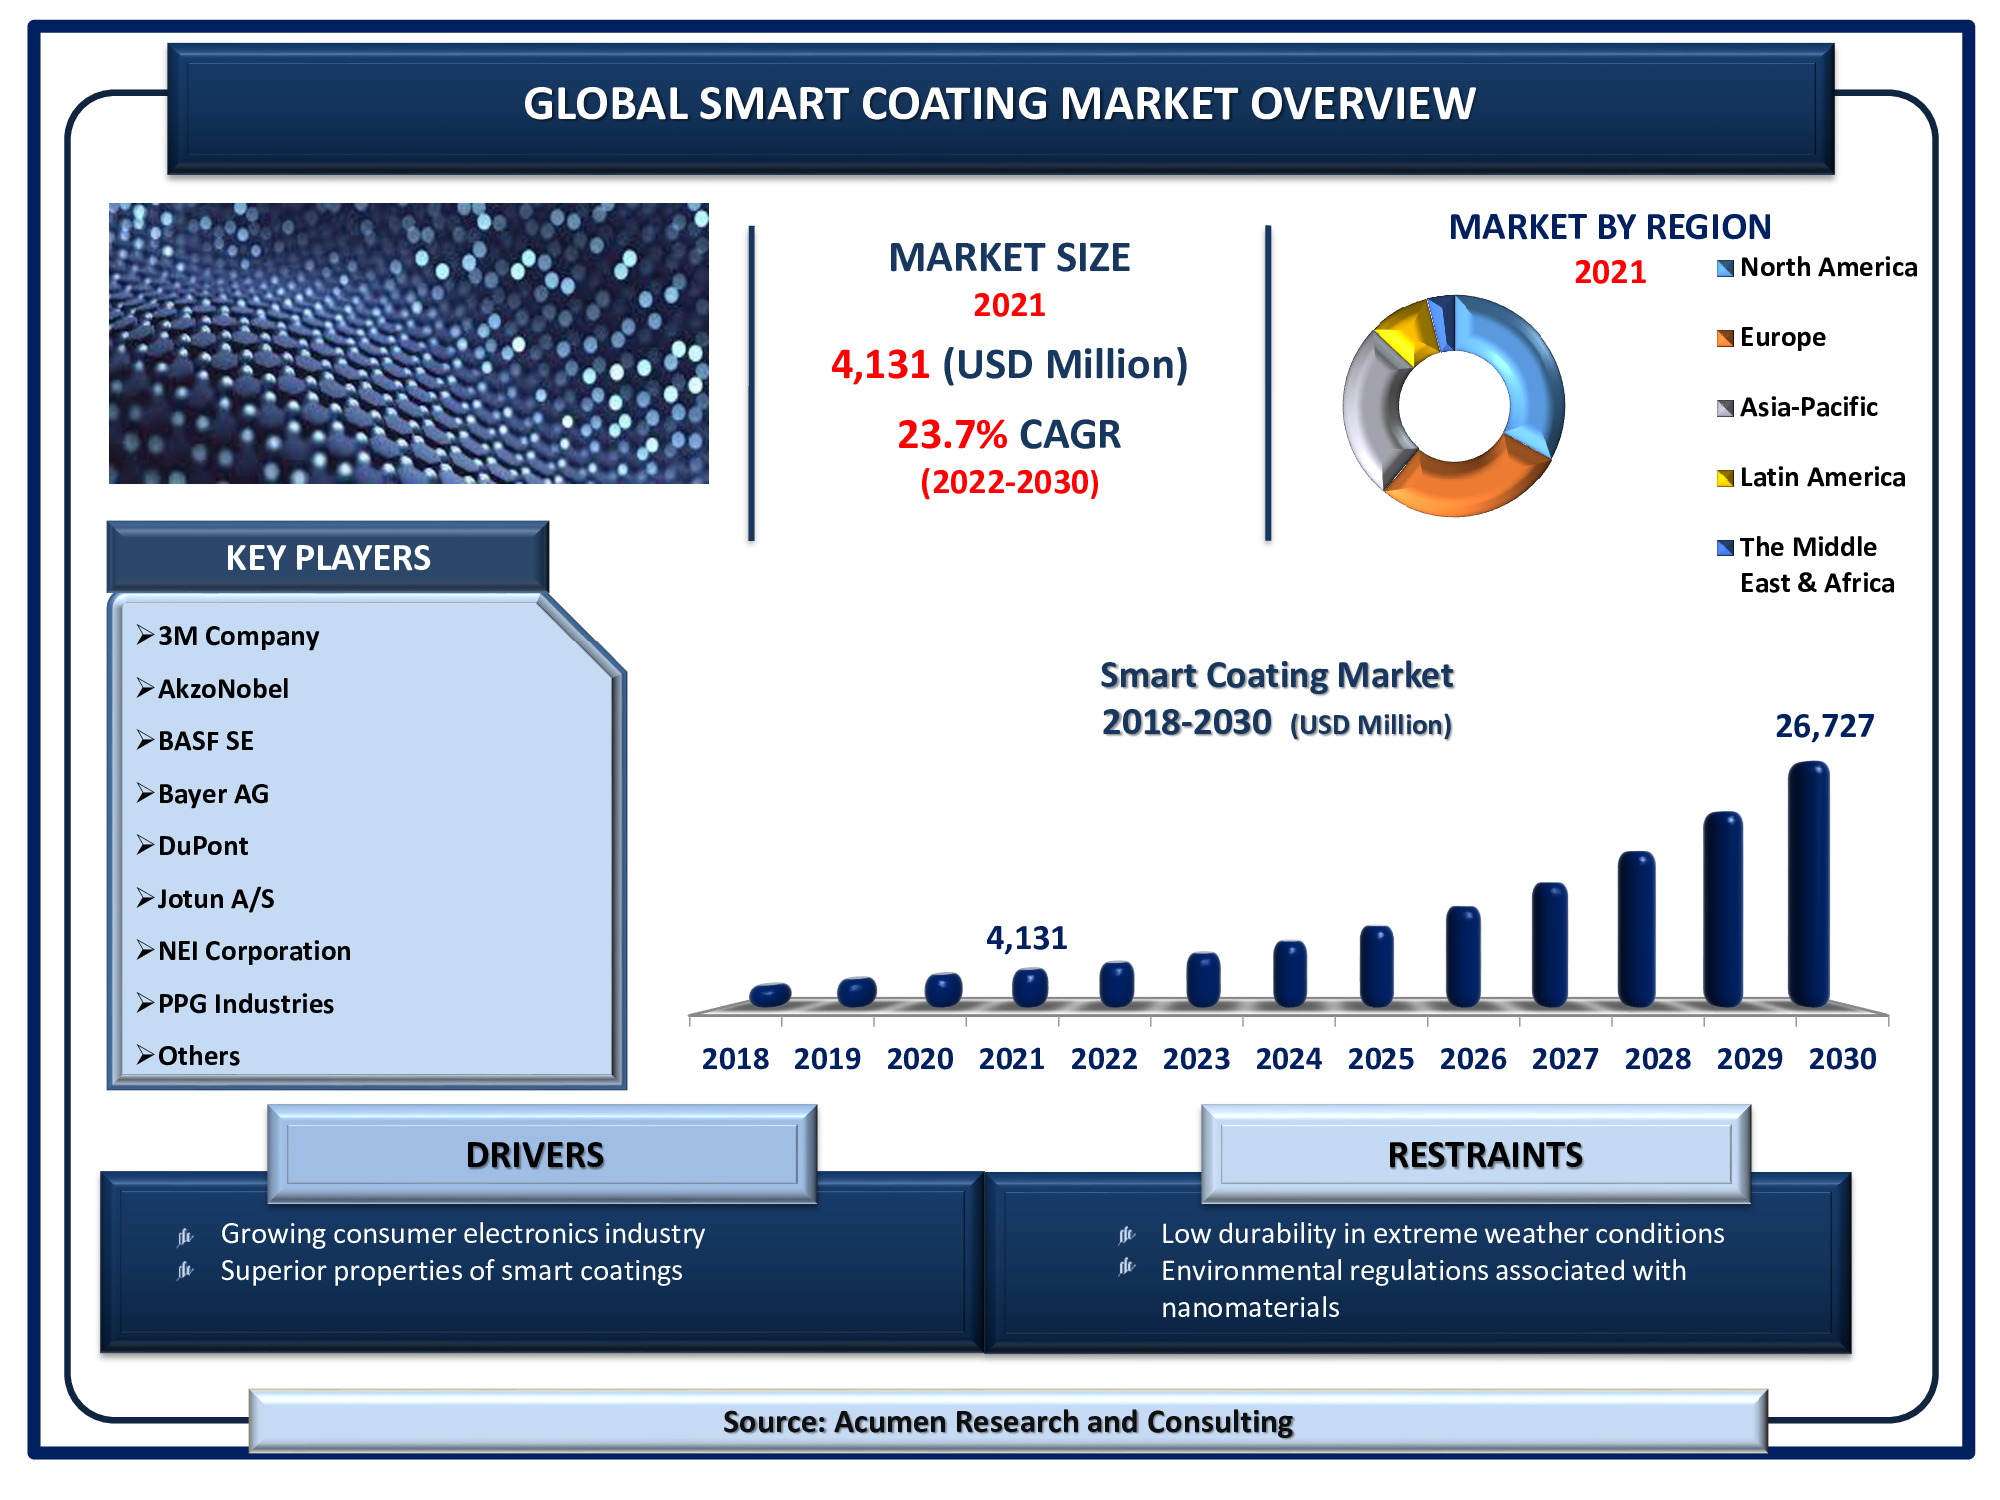 The Global Smart Coating Market Size was valued at USD 4,131 Million in 2021 and is estimated to achieve a market size of USD 26,727 Million by 2030; growing at a CAGR of 23.7%.